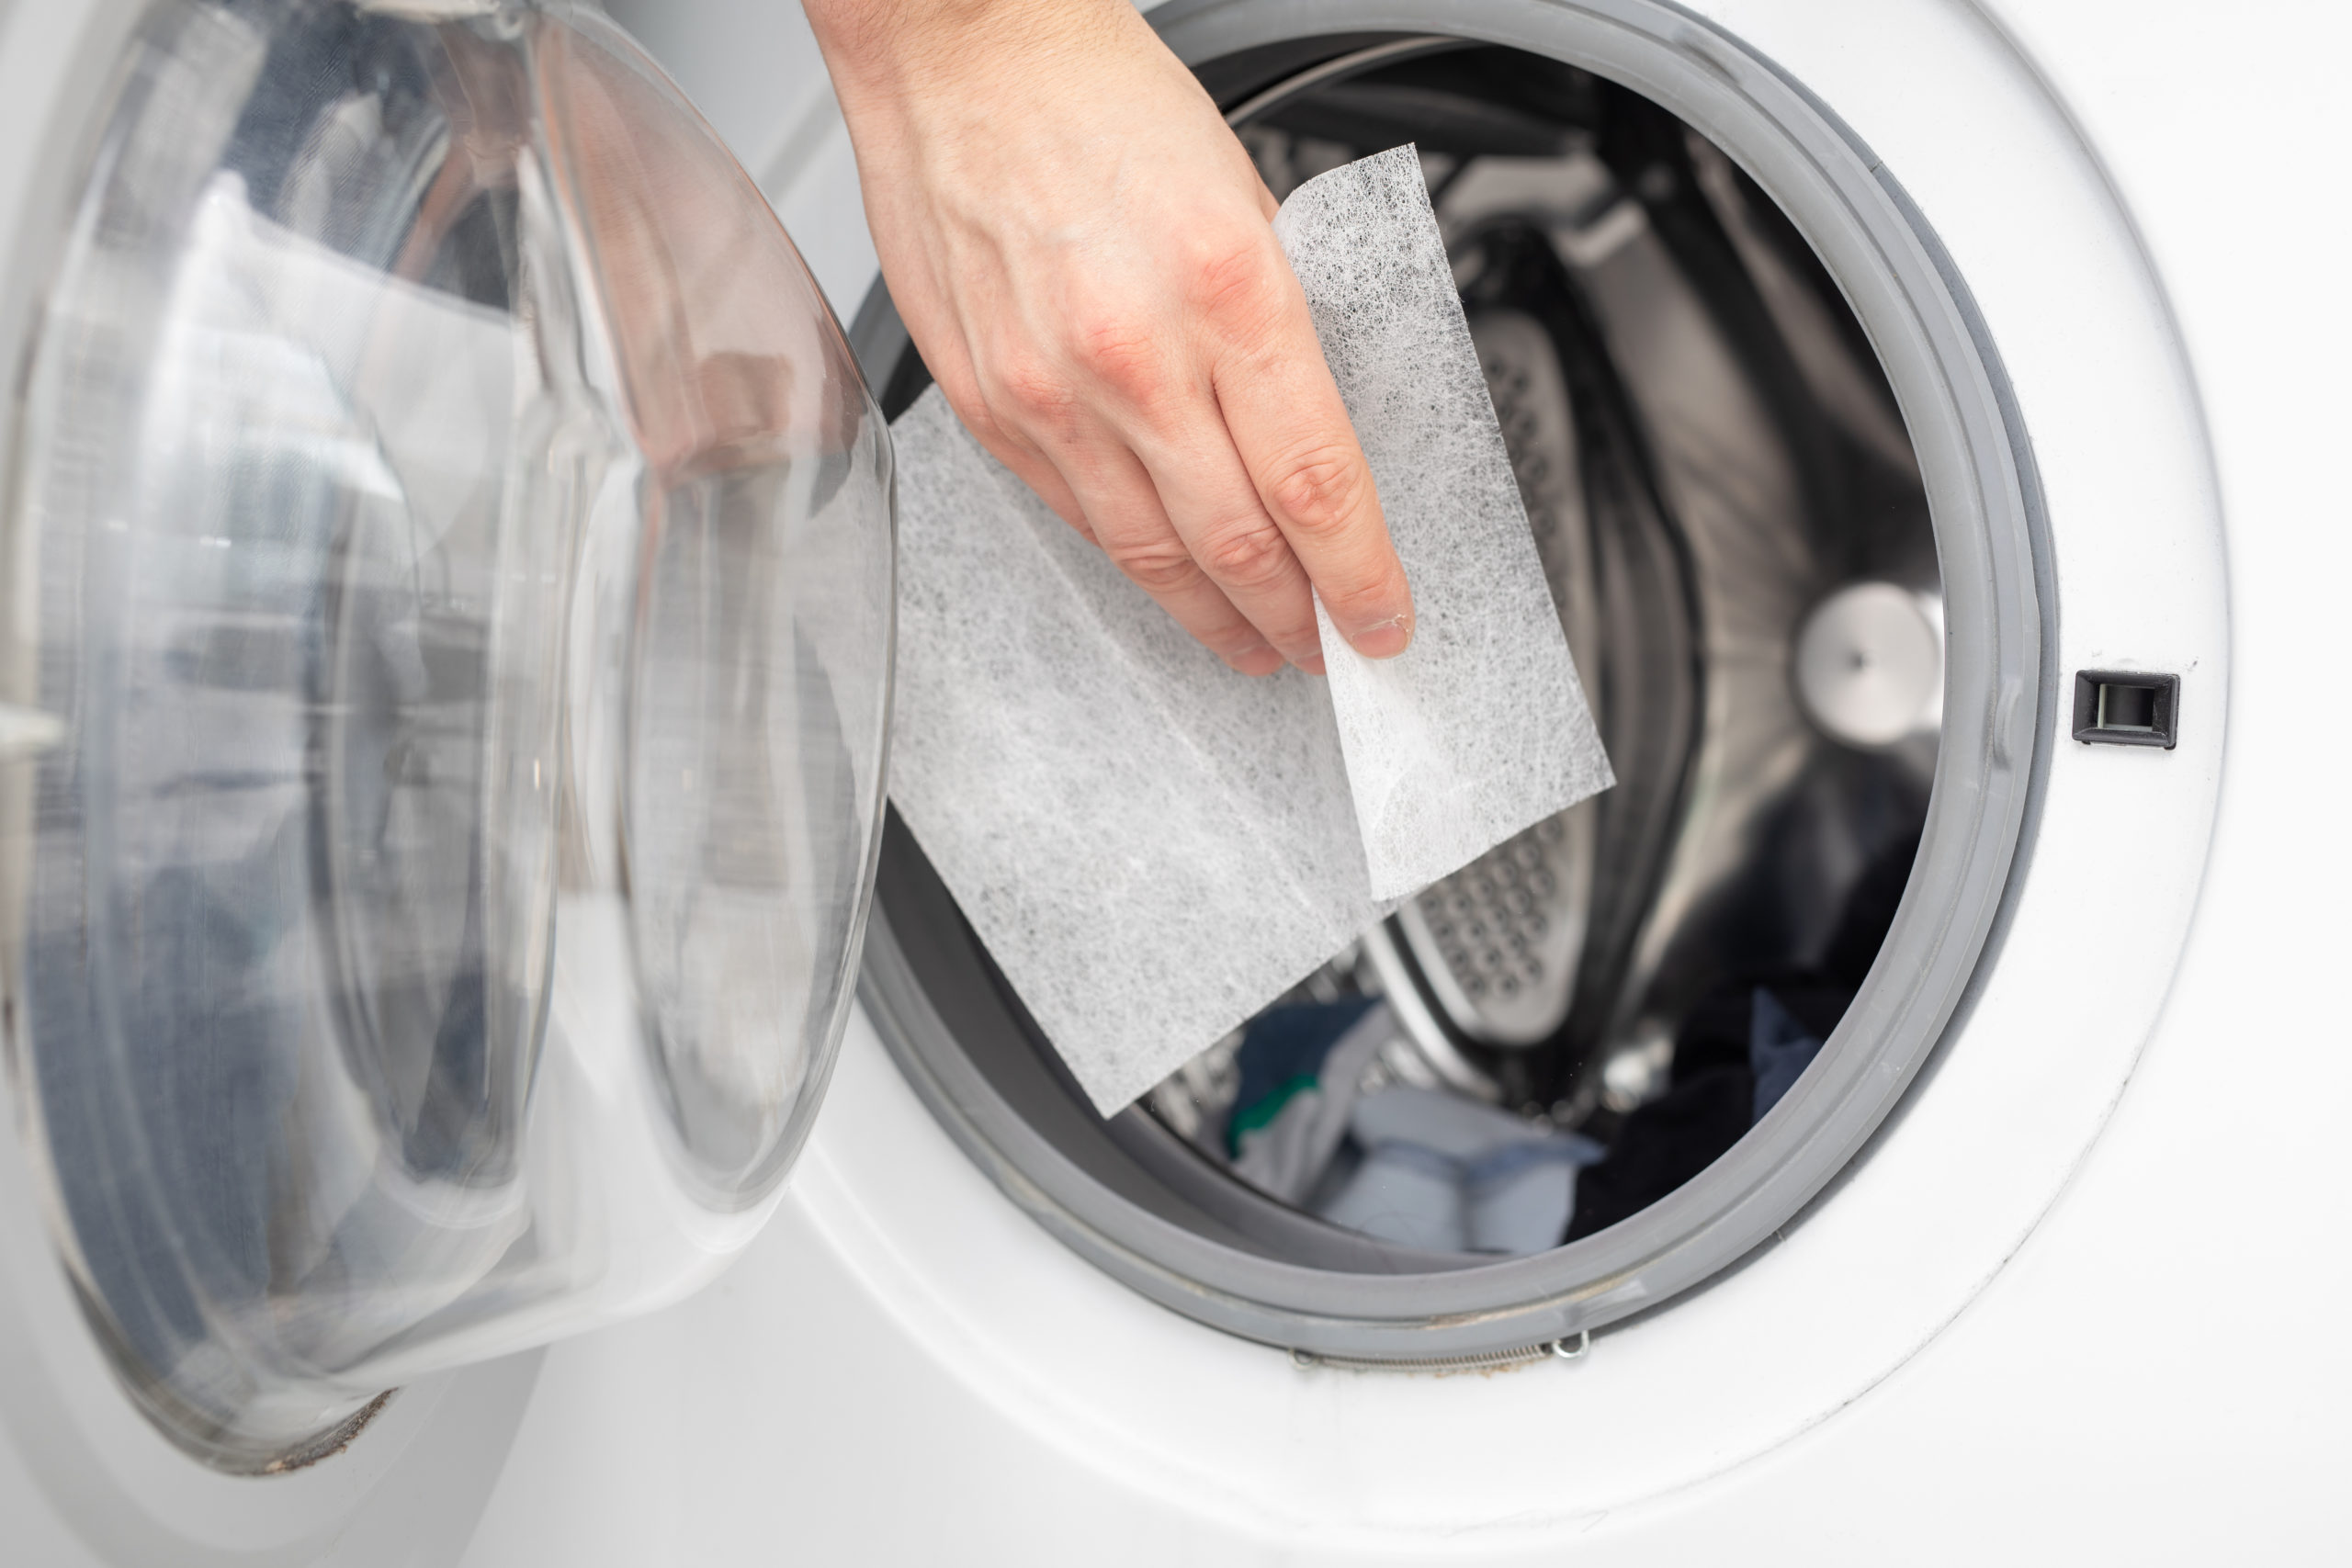 Tips for Using a Dryer